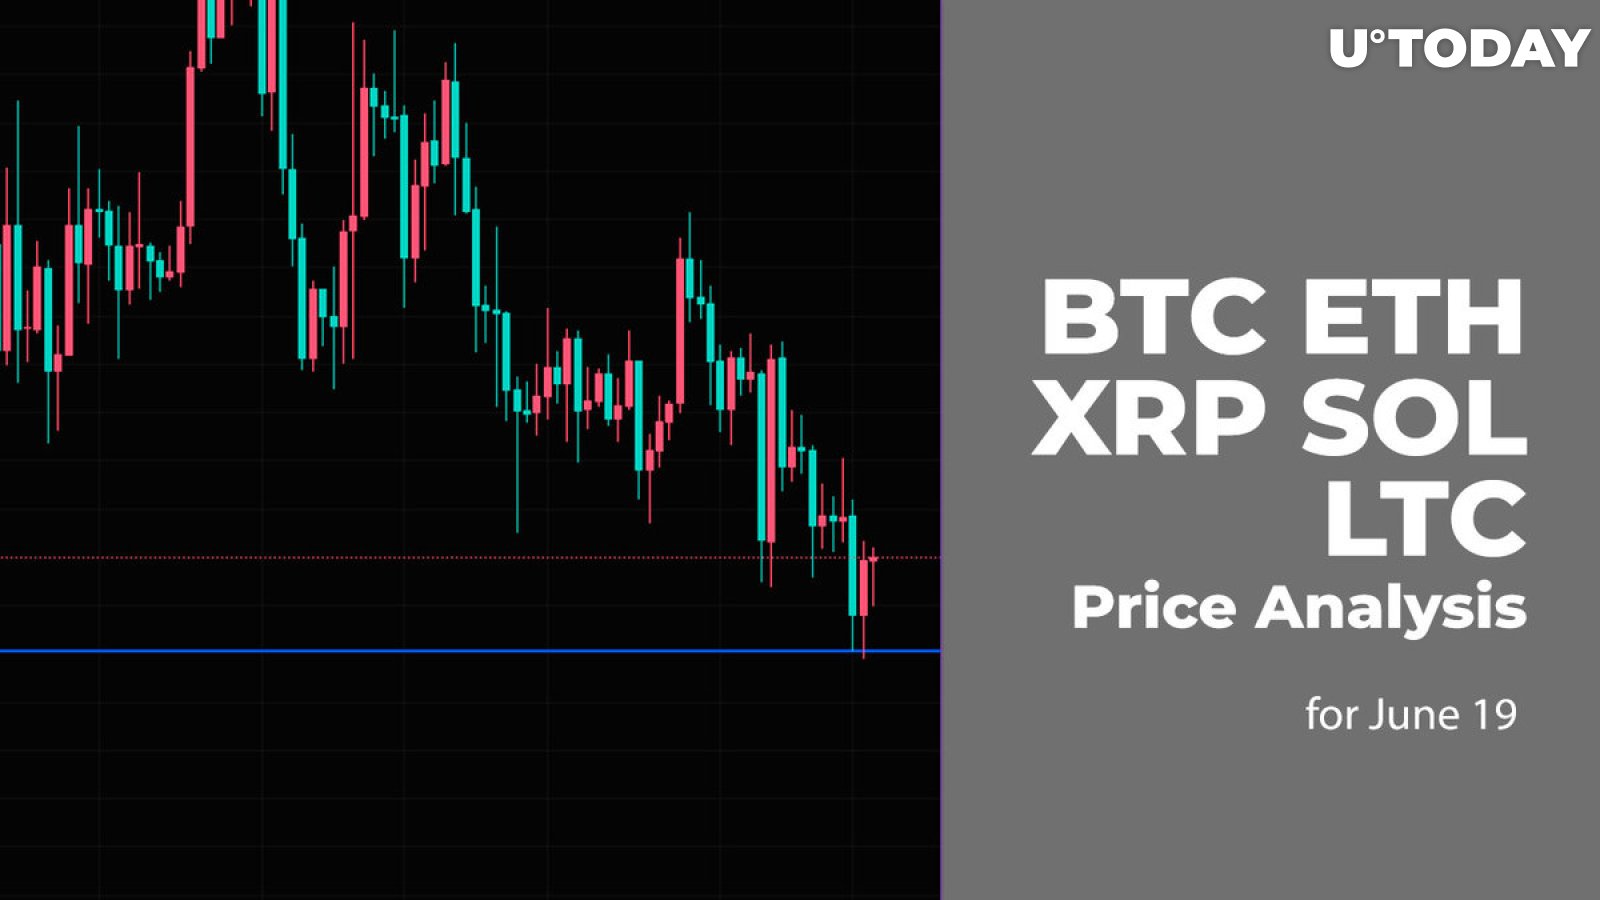 BTC, ETH, XRP, SOL and LTC Price Analysis for June 19